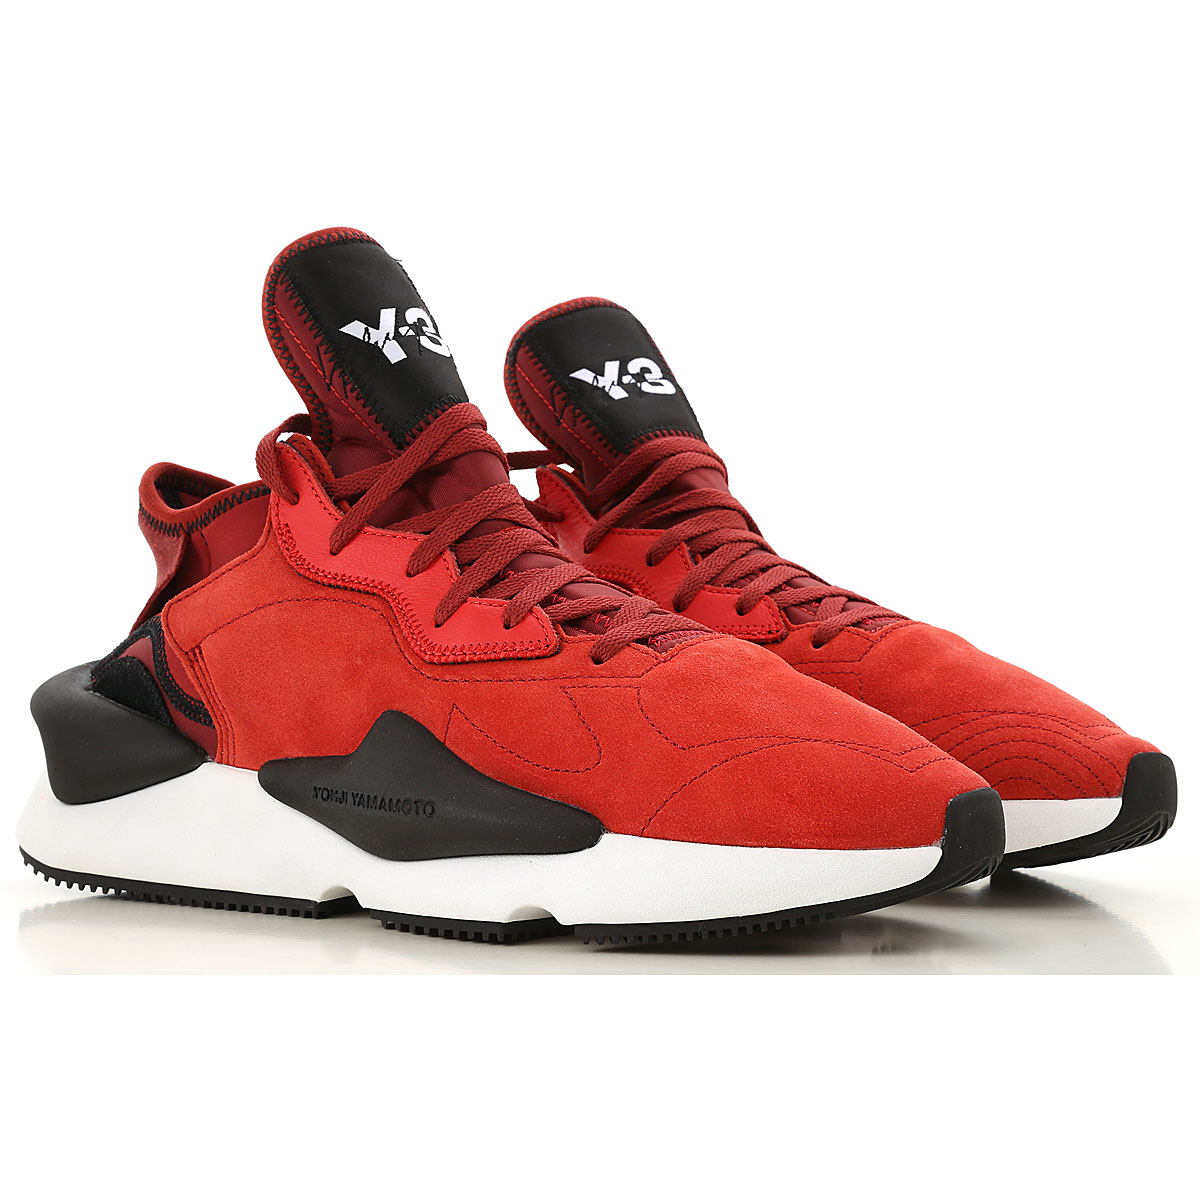 Mens Shoes Y3 by Yohji Yamamoto, Style code: cg6981-rosso-